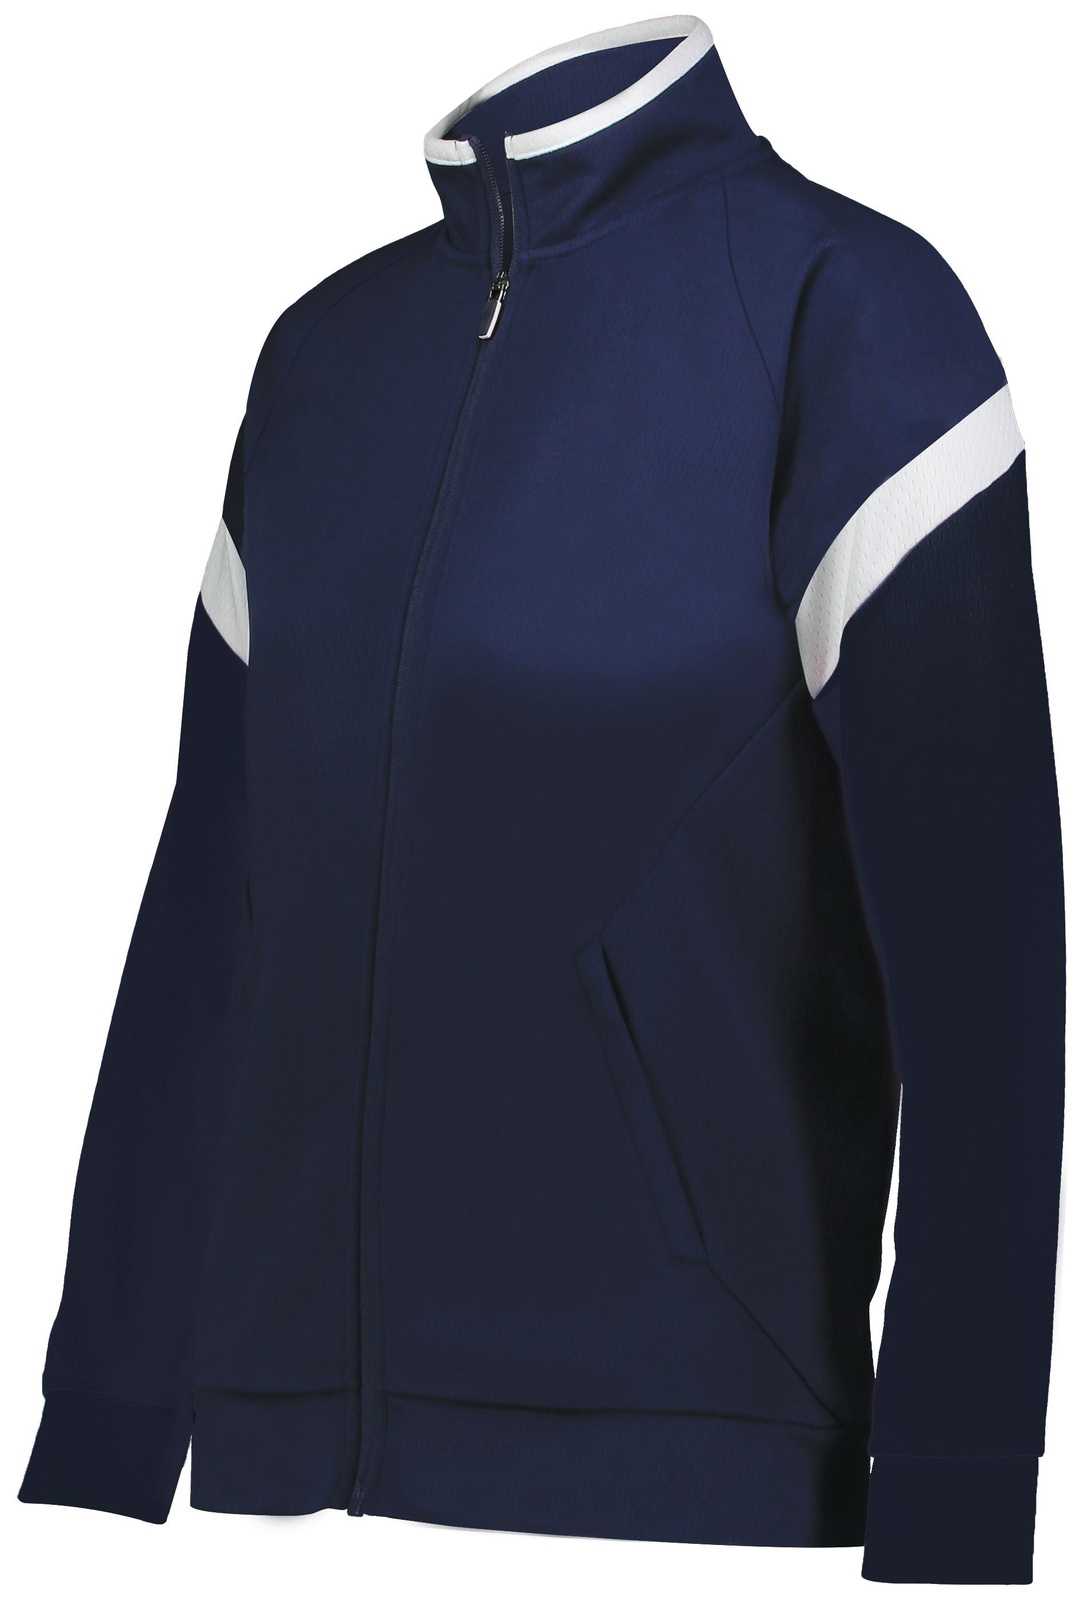 Holloway 229779 Ladies Limitless Jacket - Navy White - HIT a Double